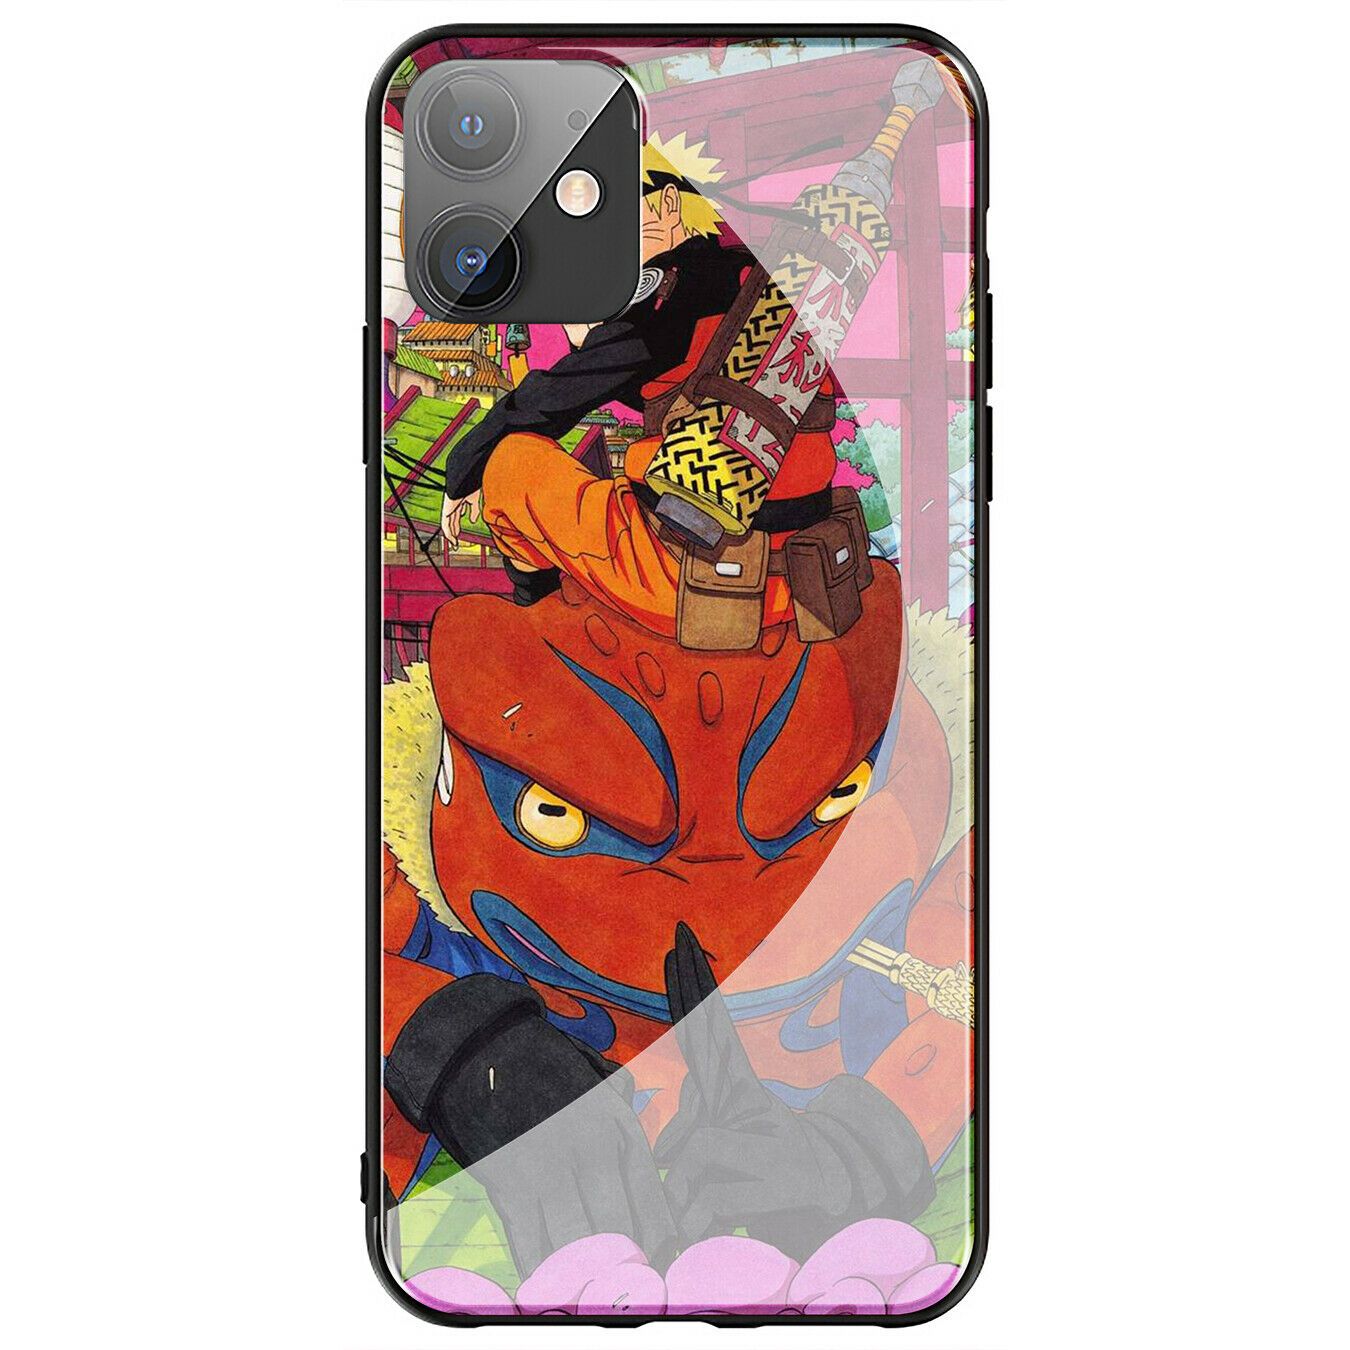 Sasuke NARUTO Akatsuki Glass Case for iPhone 11 Pro XR X XS Max 8 7 6 6s Plus + iPhone Cases AtlasCase 9 for iPhone 6/6S 